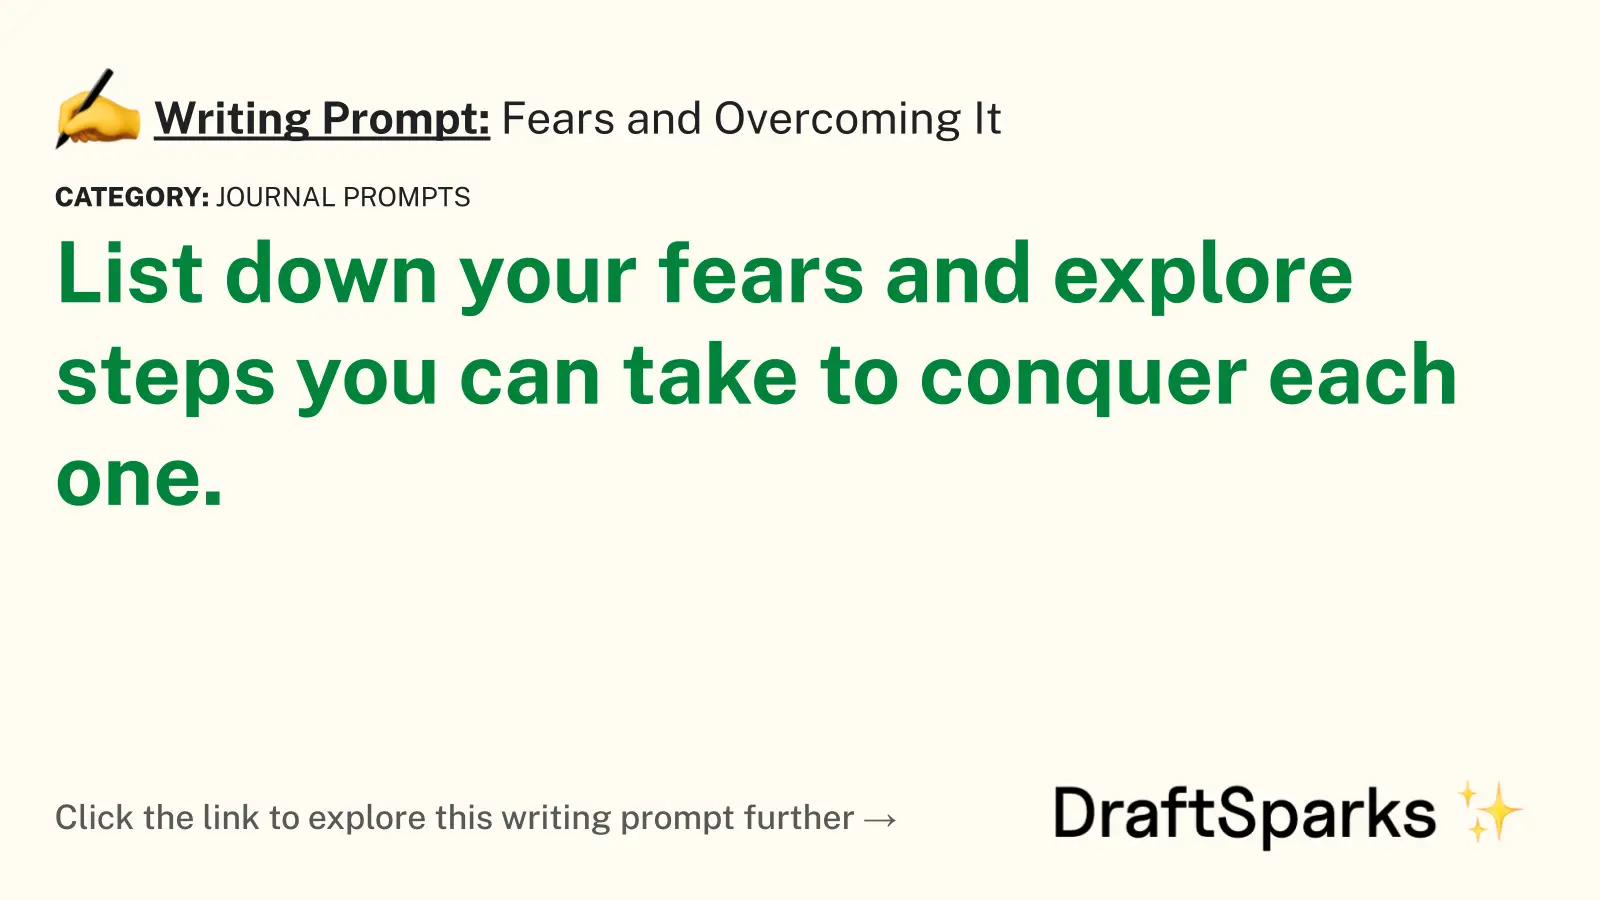 Fears and Overcoming It